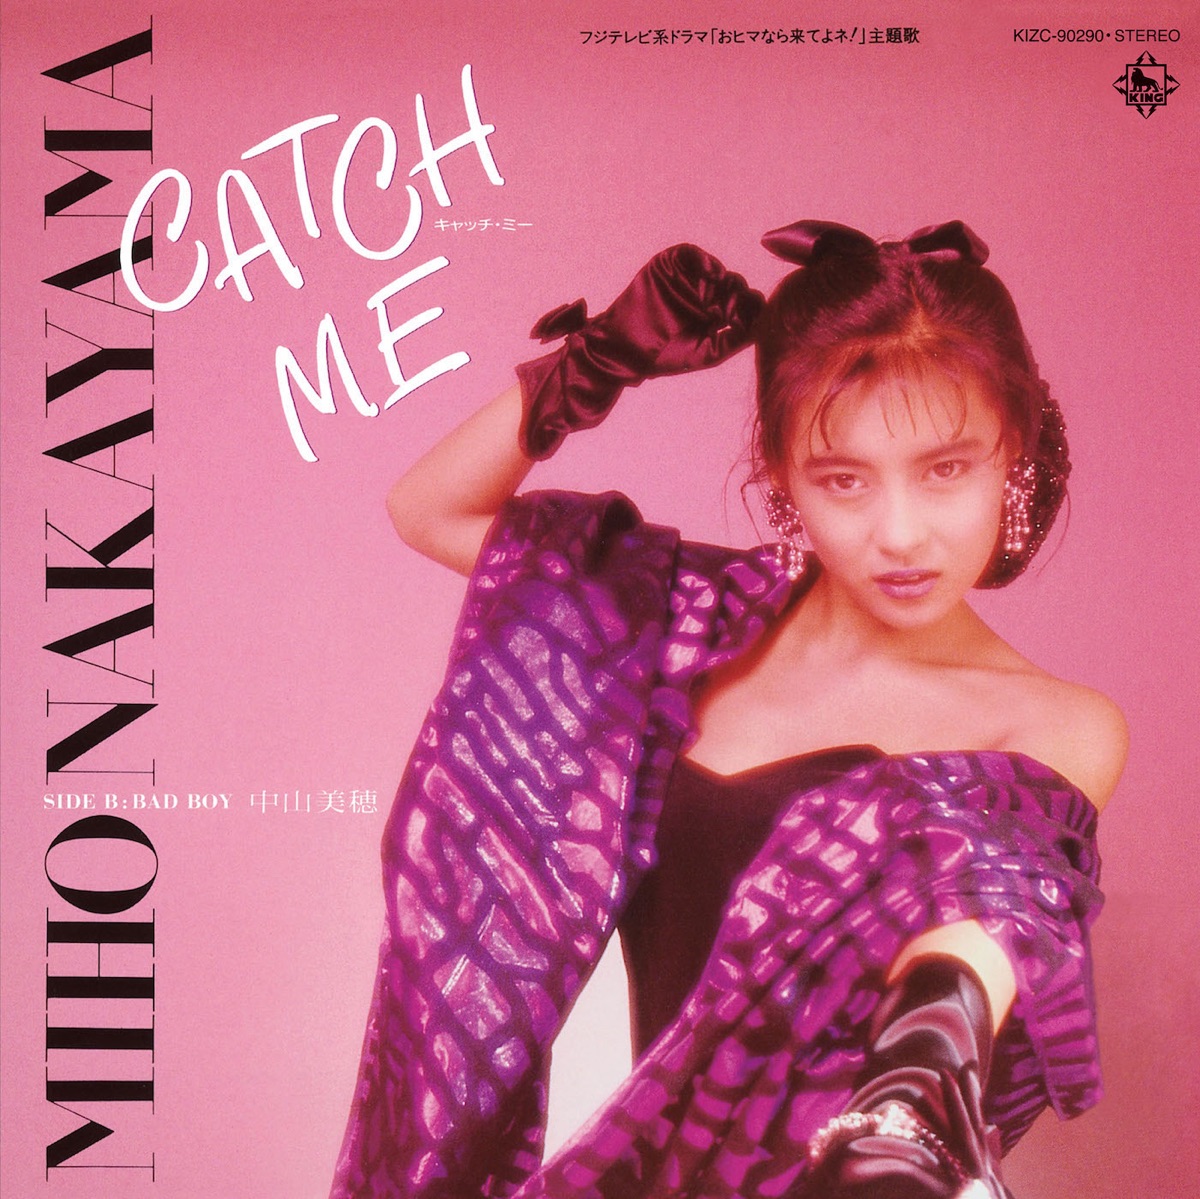 Cover art for『Miho Nakayama - CATCH ME』from the release『CATCH ME